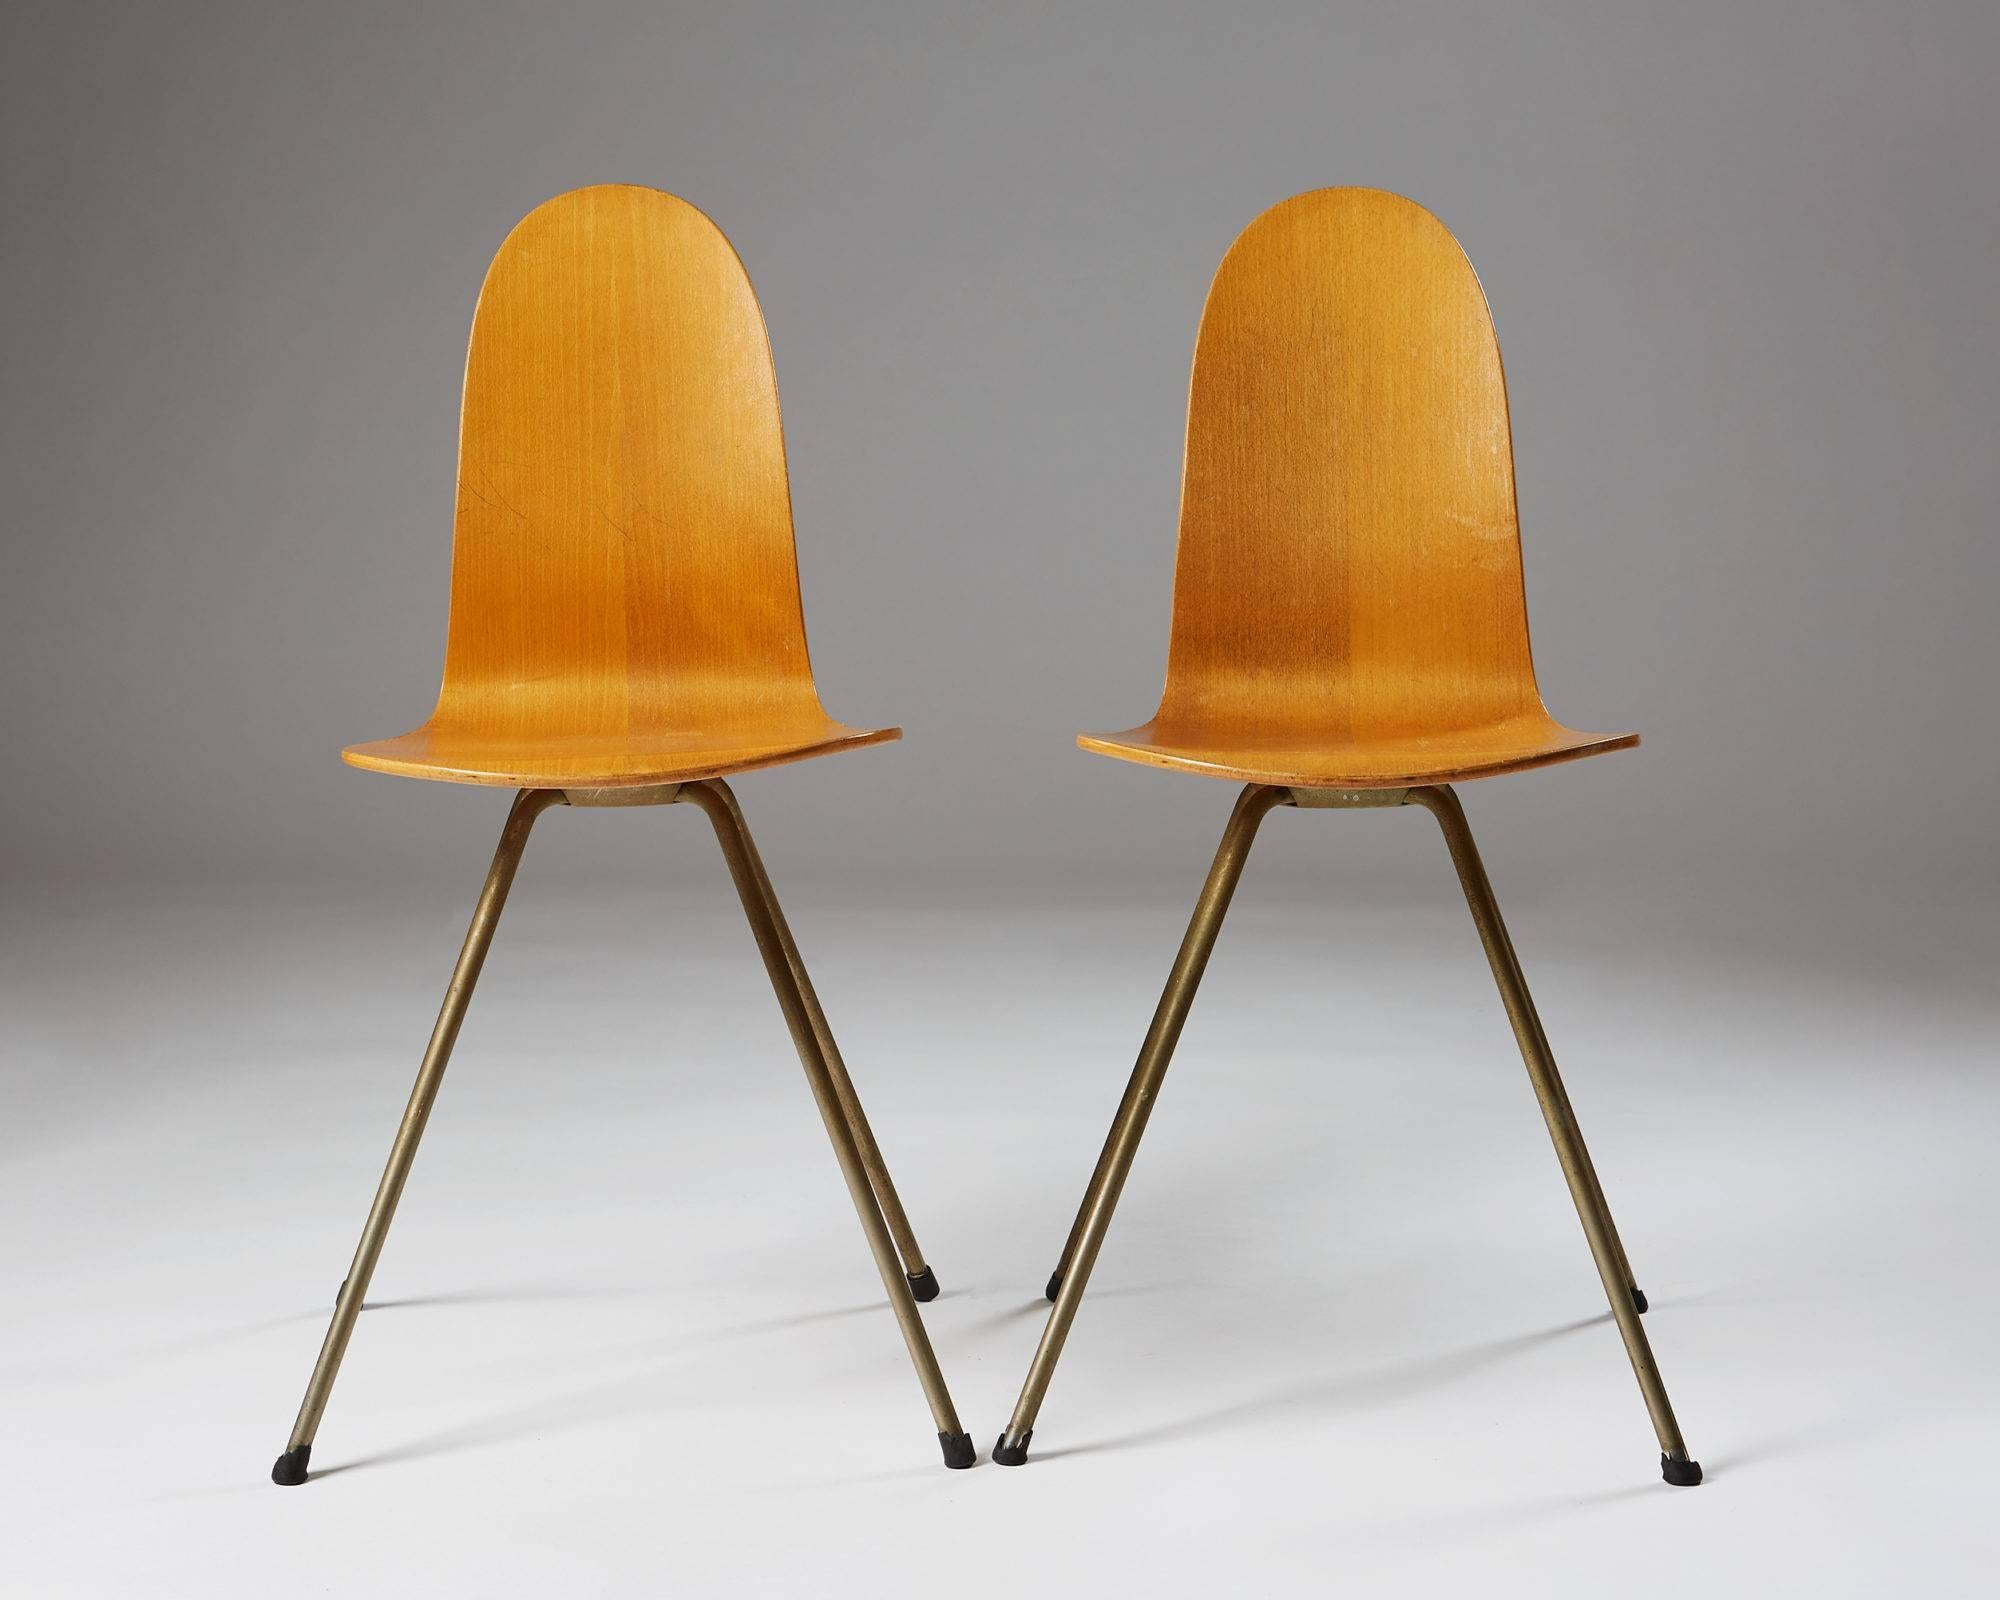 Pair of chairs The Tongue designed by Arne Jacobsen for Fritz Hansen,
Denmark, 1955.

Beech plywood and steel.

Originally designed in 1955 for Munkegaard School in Denmark.
These examples very early.

Sold as a pair.
Measures:
H 79 cm/